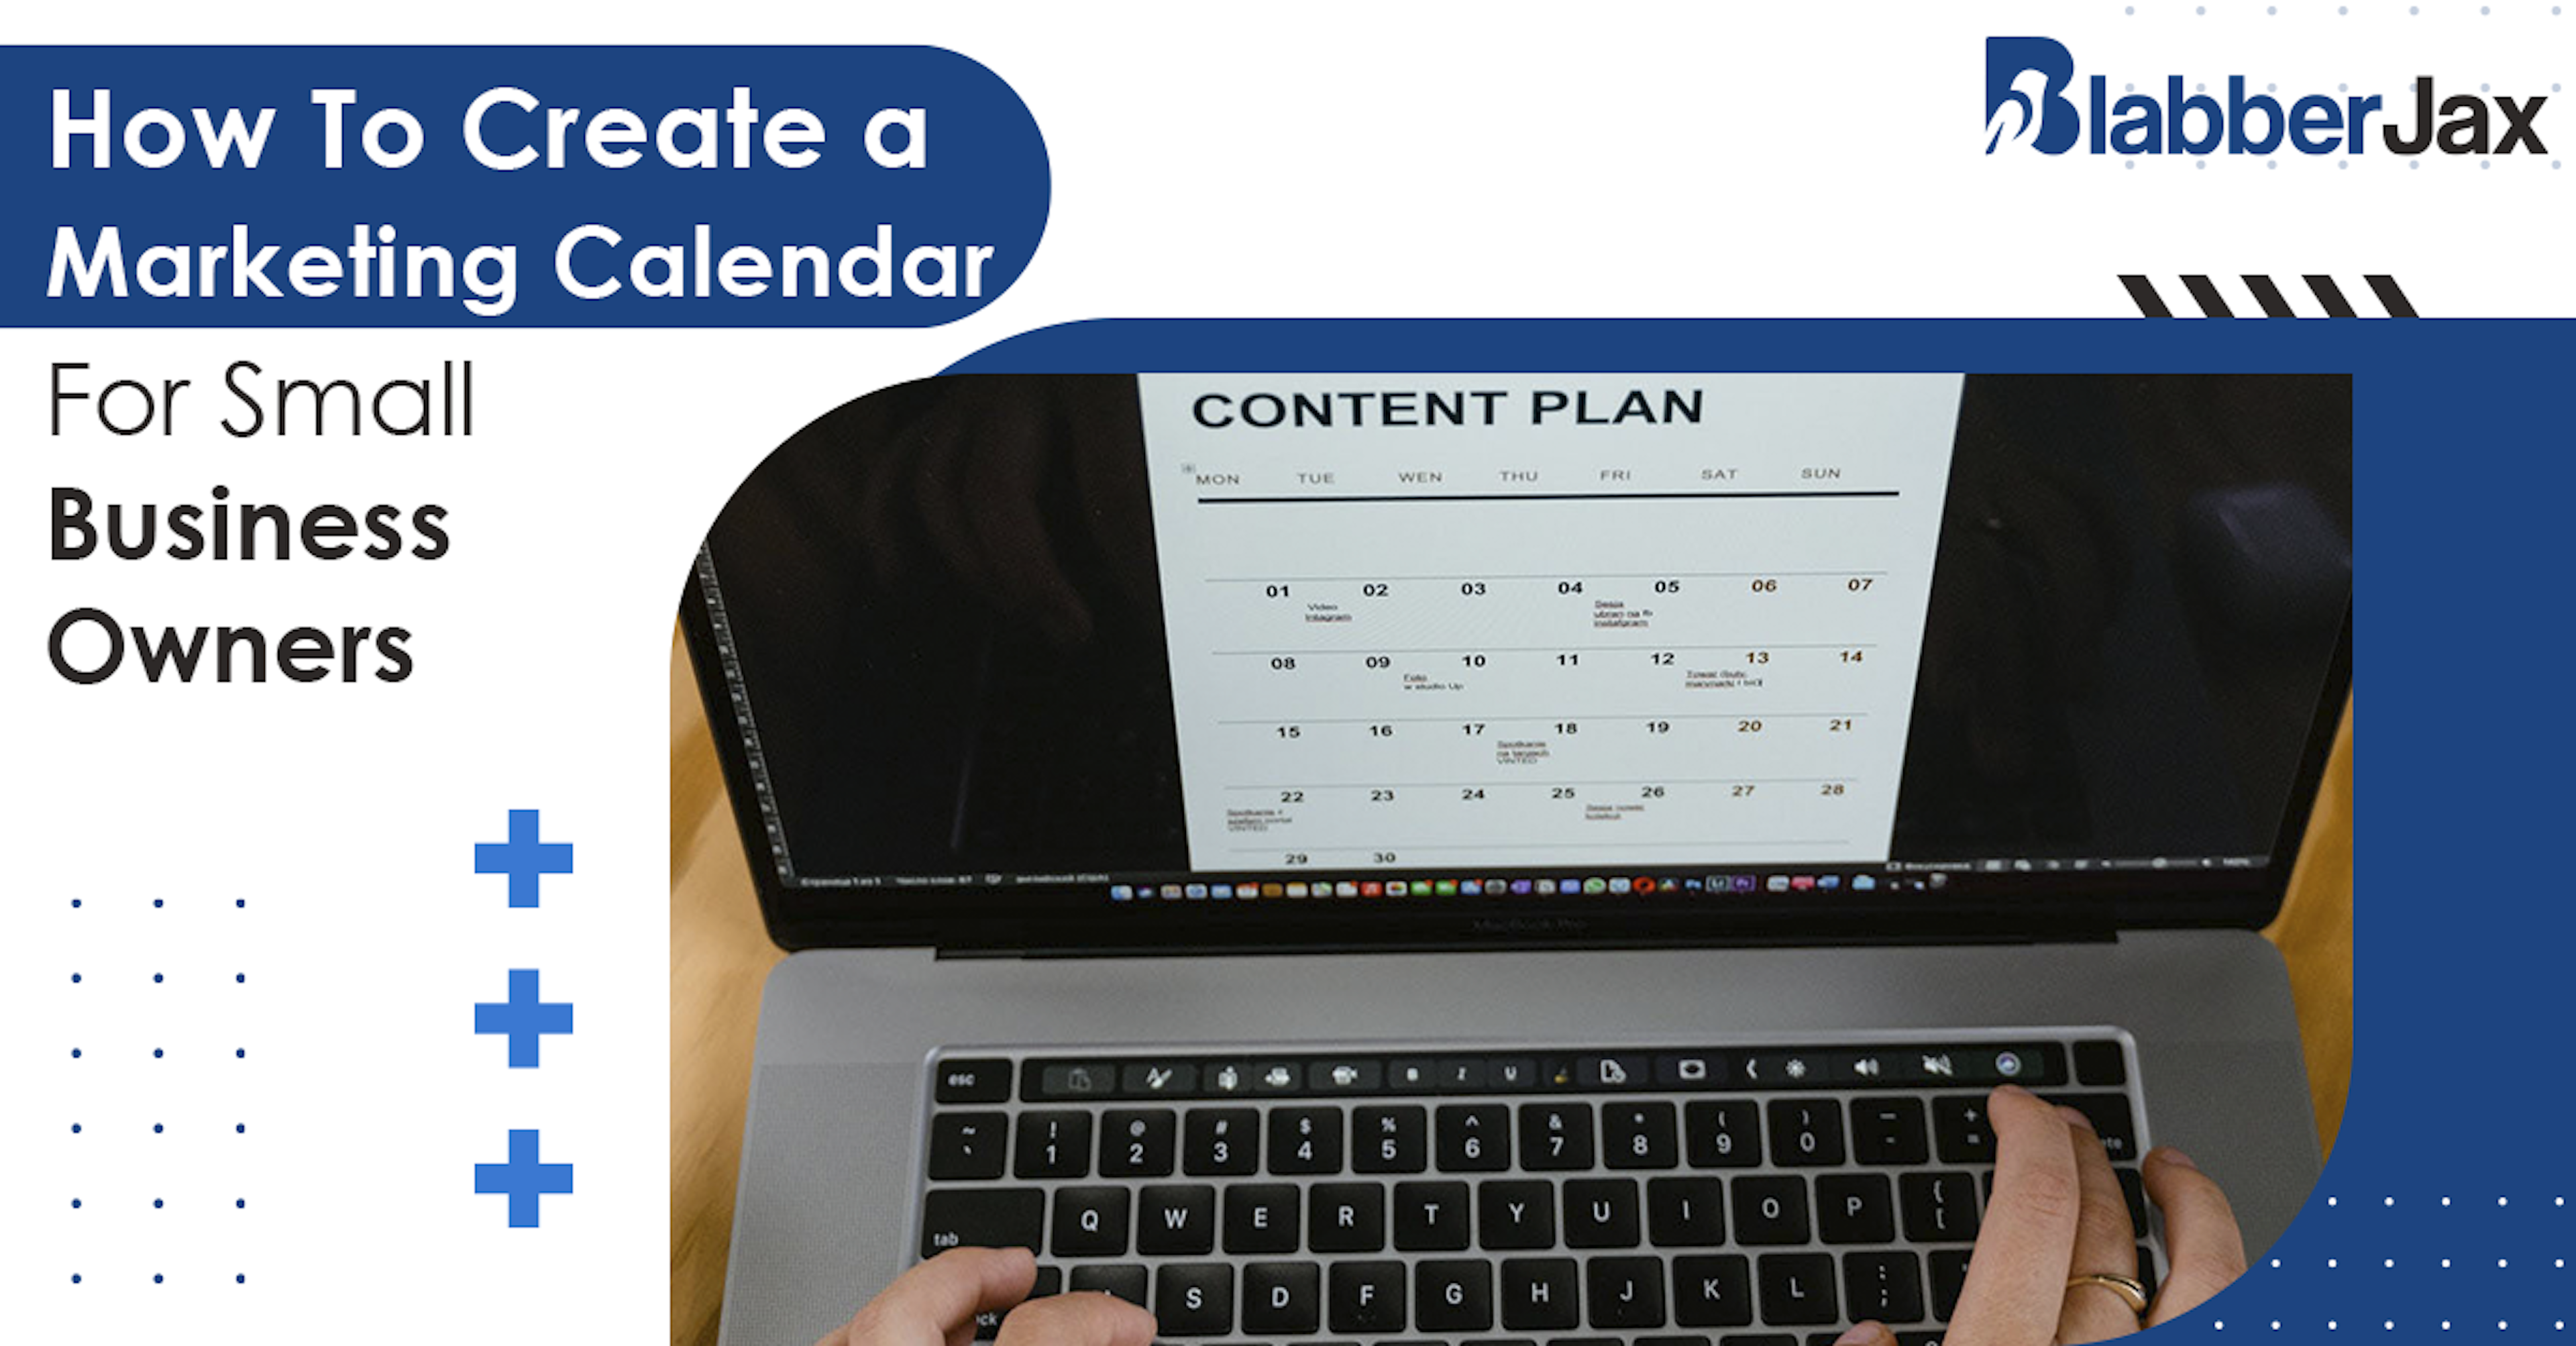 How To Create a Marketing Calendar For Small Business Owners